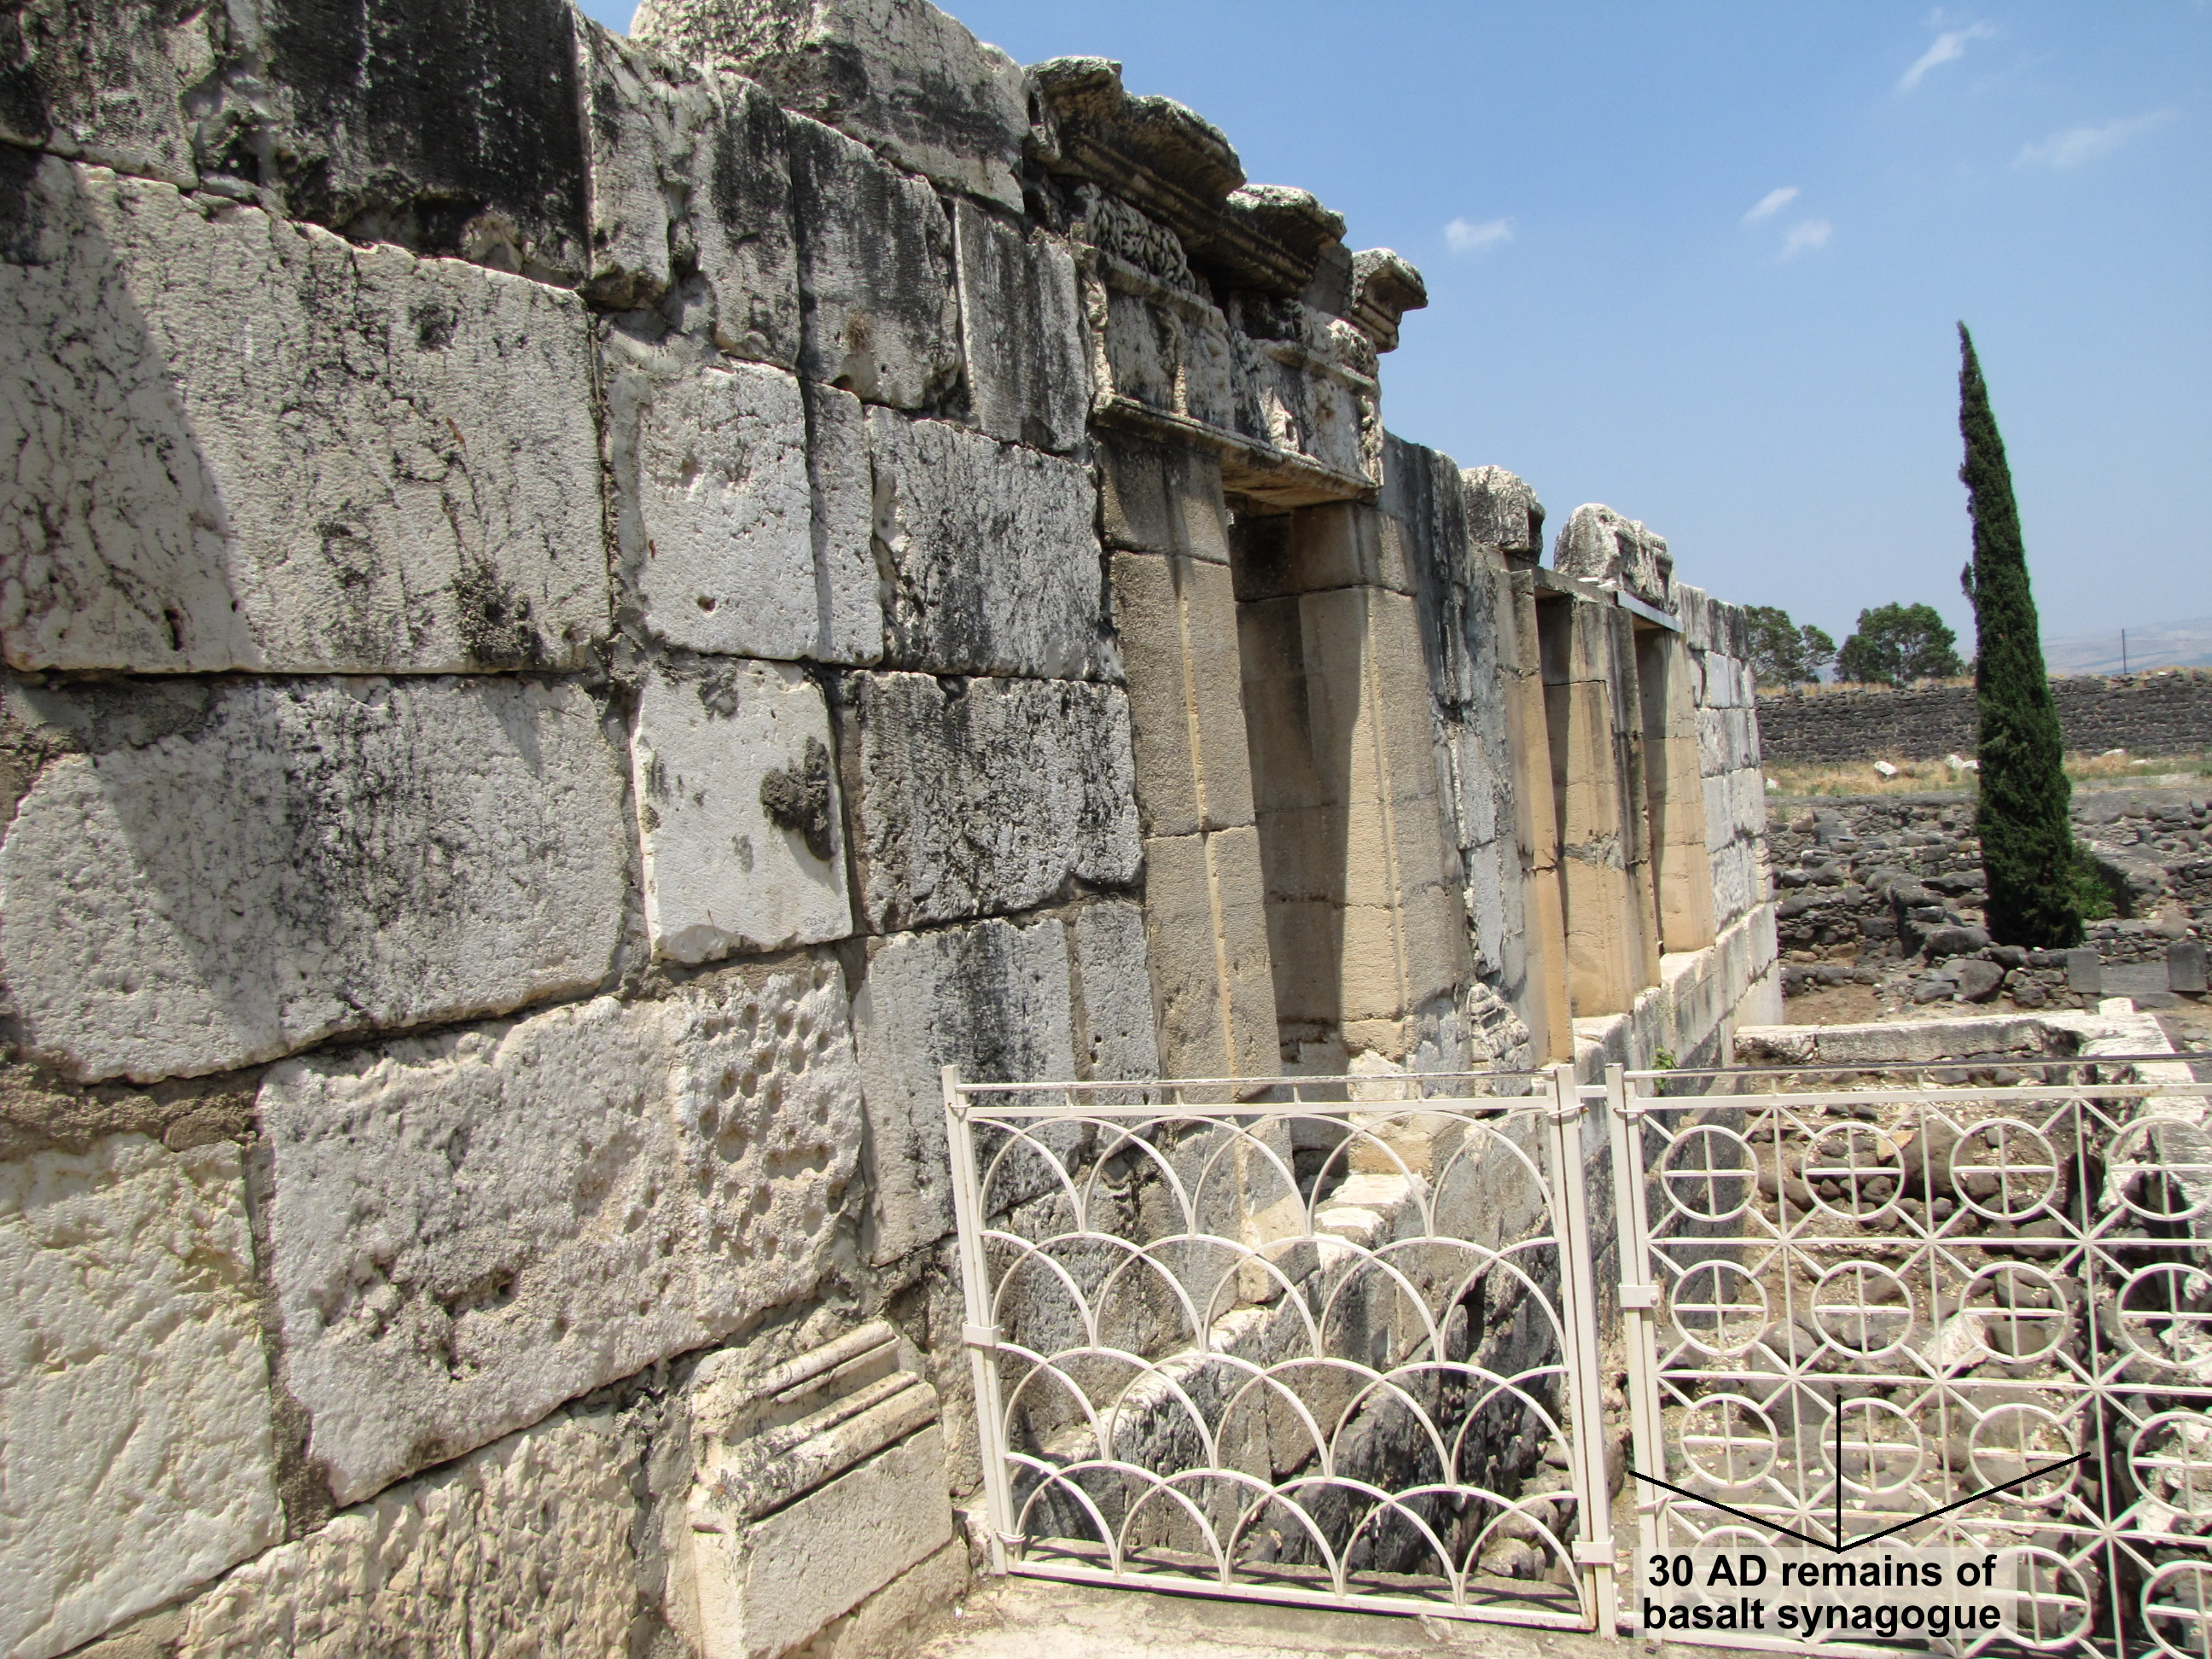 Capernaum Synagogue first century remains